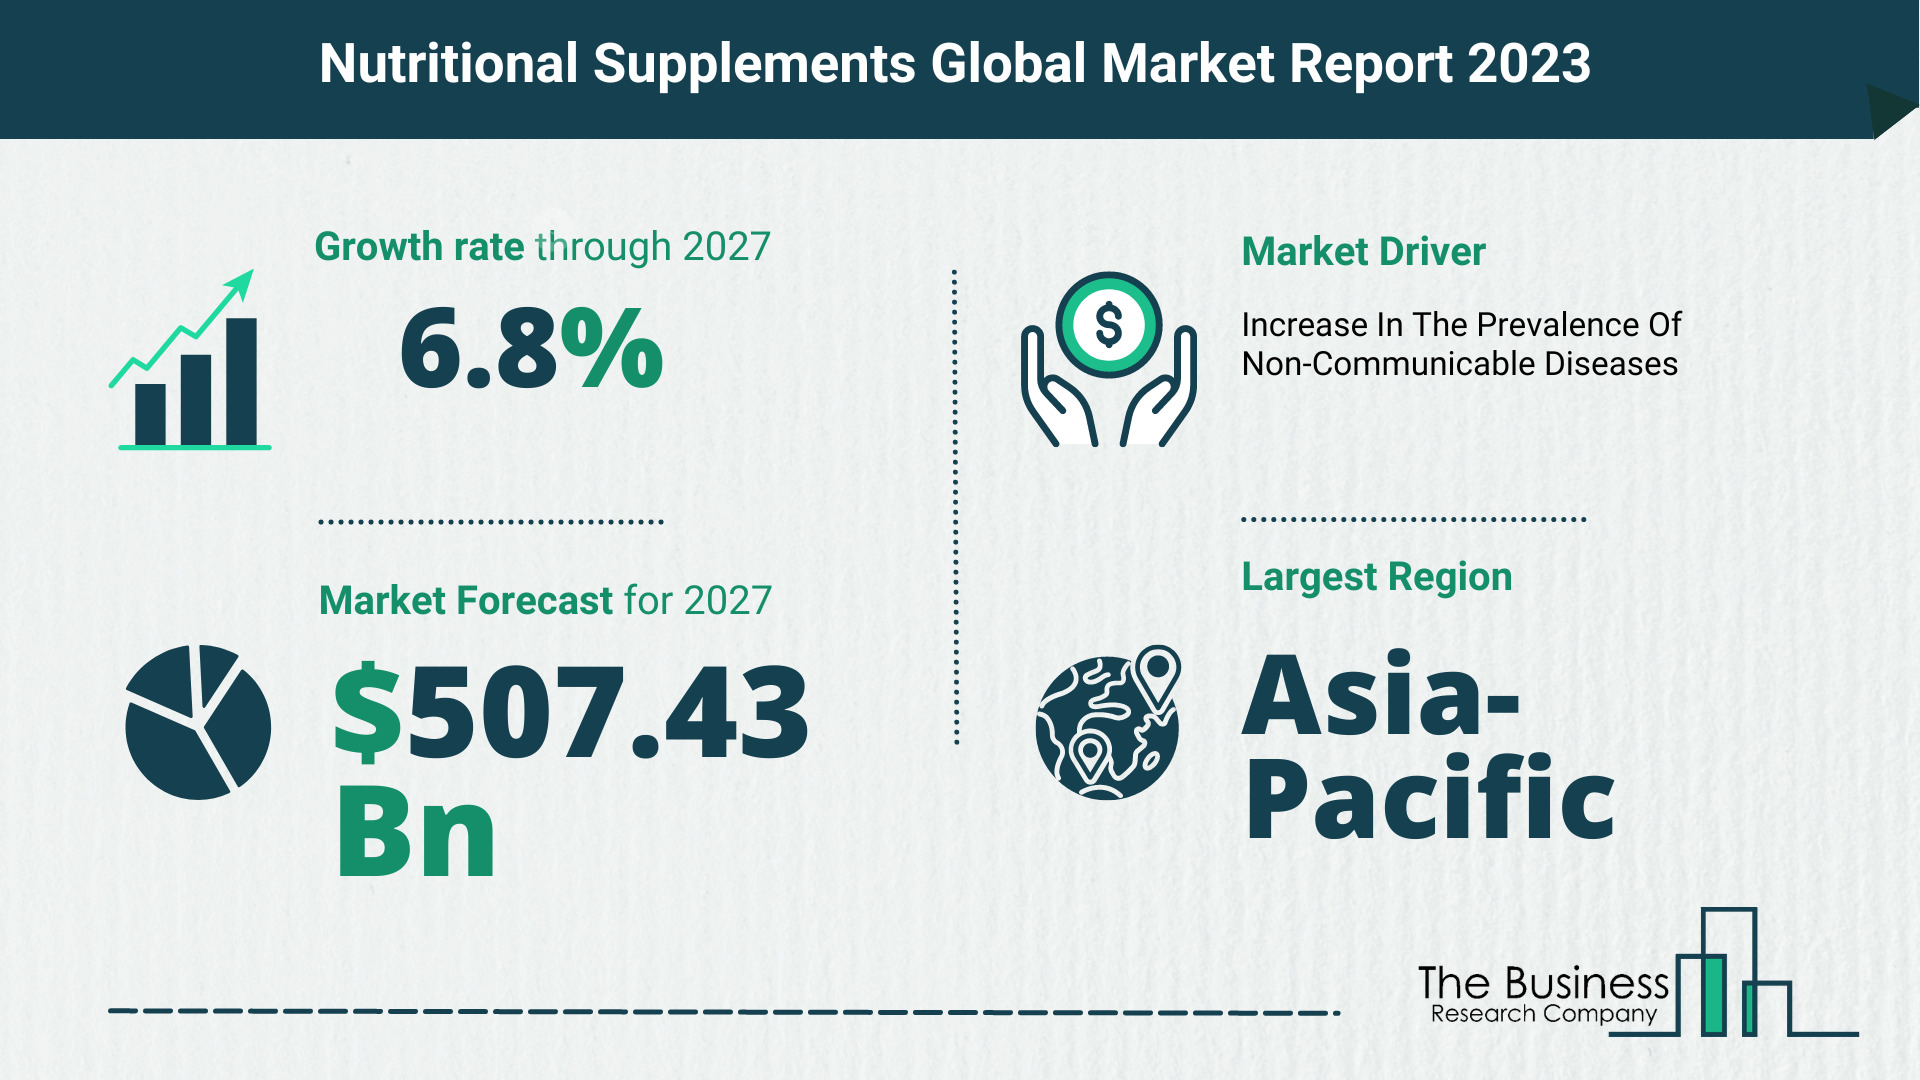 How Will The Nutritional Supplements Market Globally Expand In 2023?